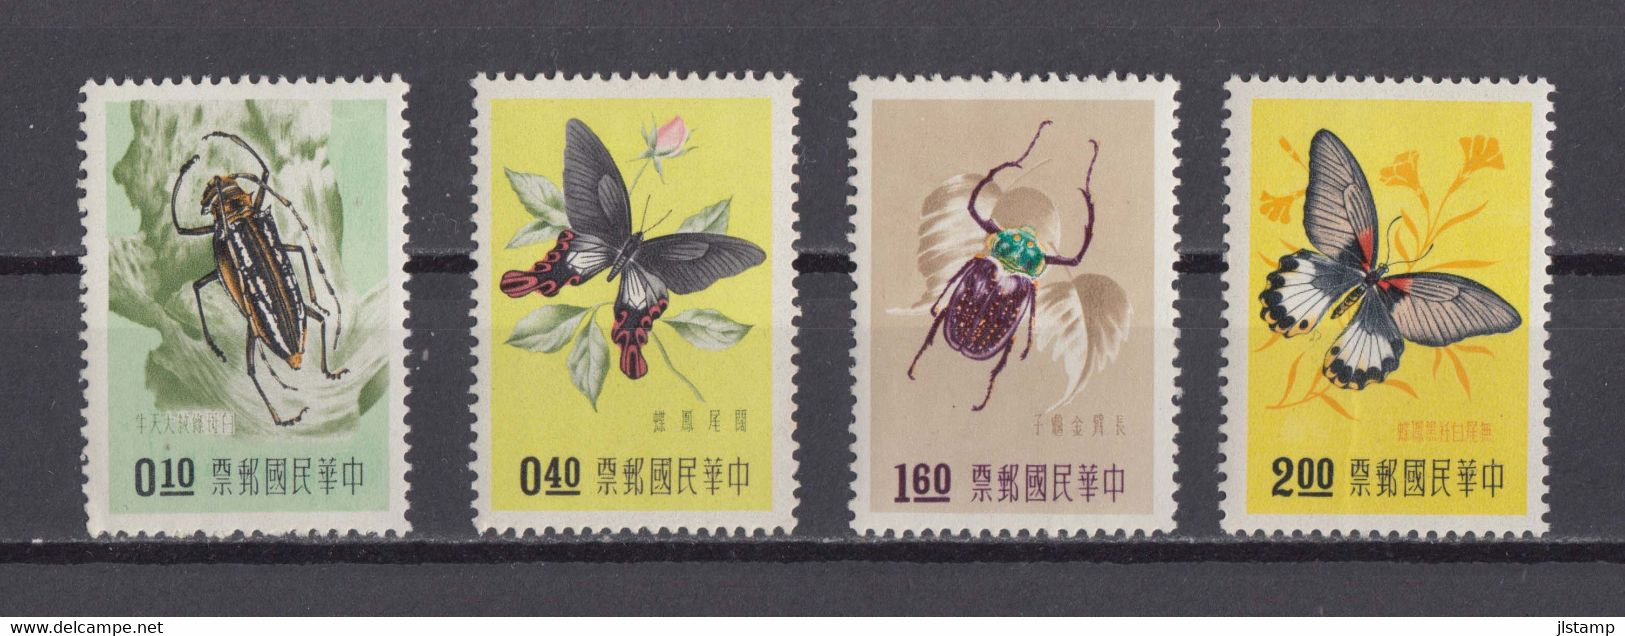 China Taiwan 1958 Insect And Butterfly Stamps 4v,Scott# 1183-1188,OG,MNH,VF - Neufs